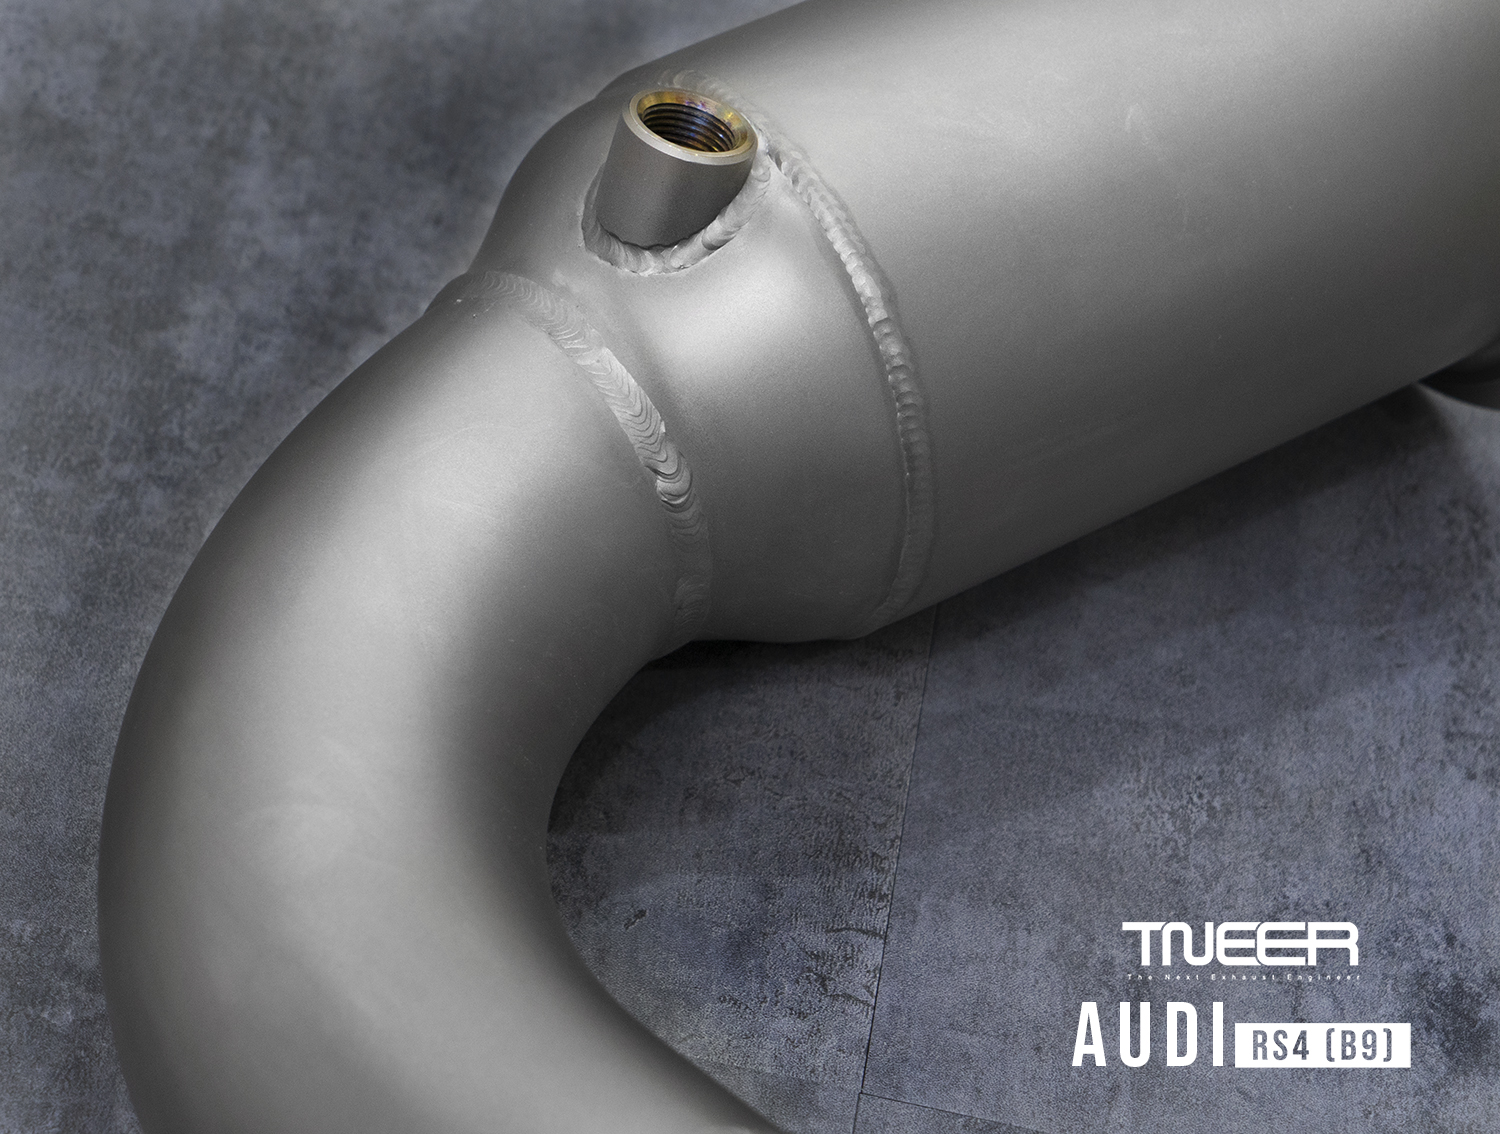 Audi RS4 (B9) TNEER Exhaust System with Dual Silver Tips